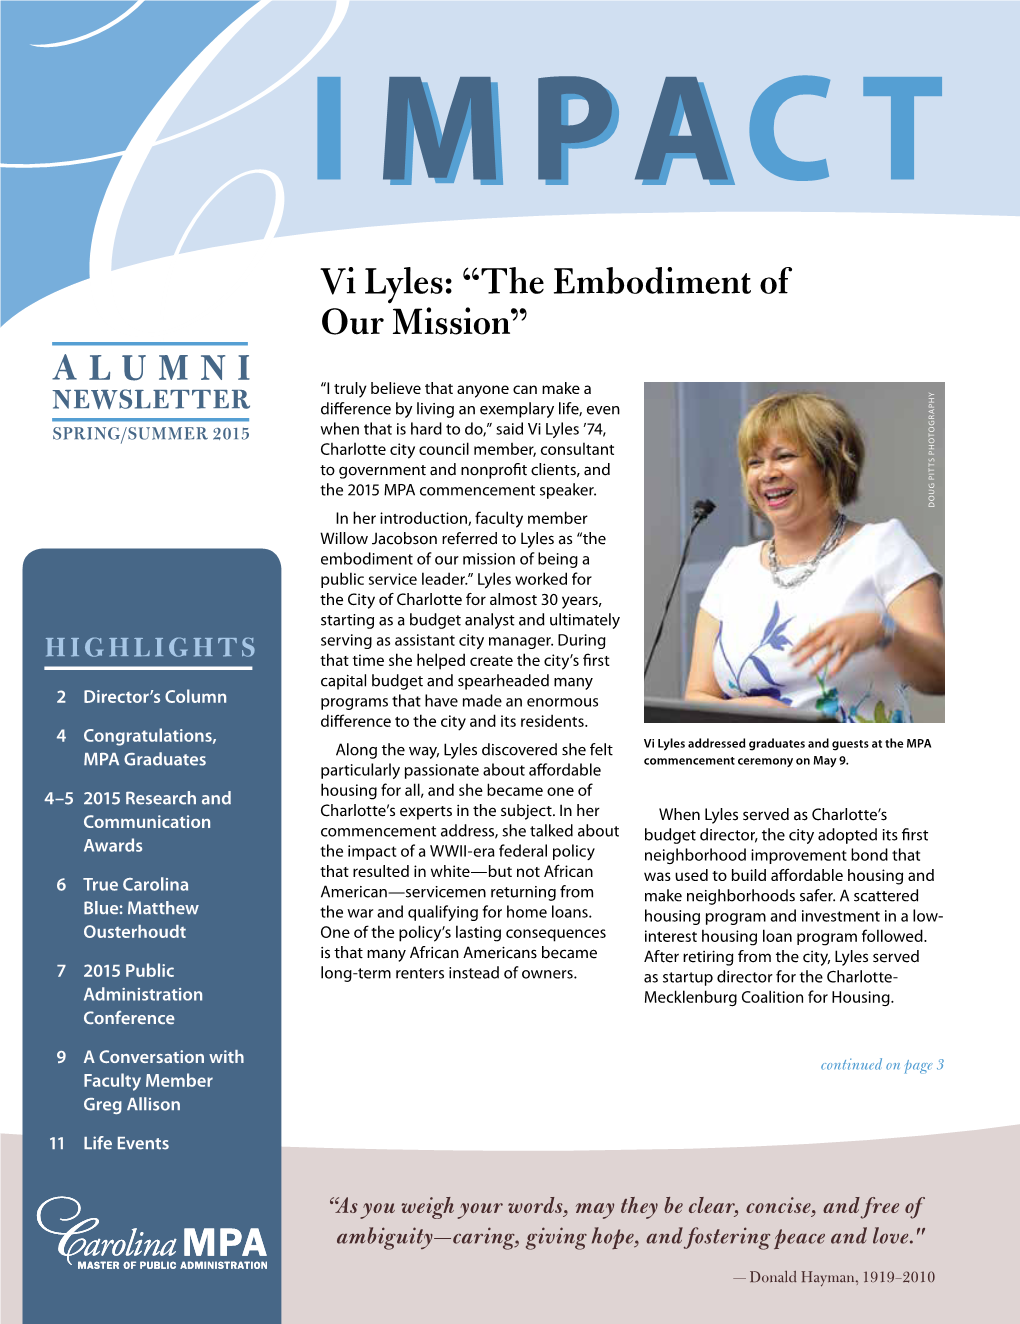 Vi Lyles: “The Embodiment of Our Mission” Alumni